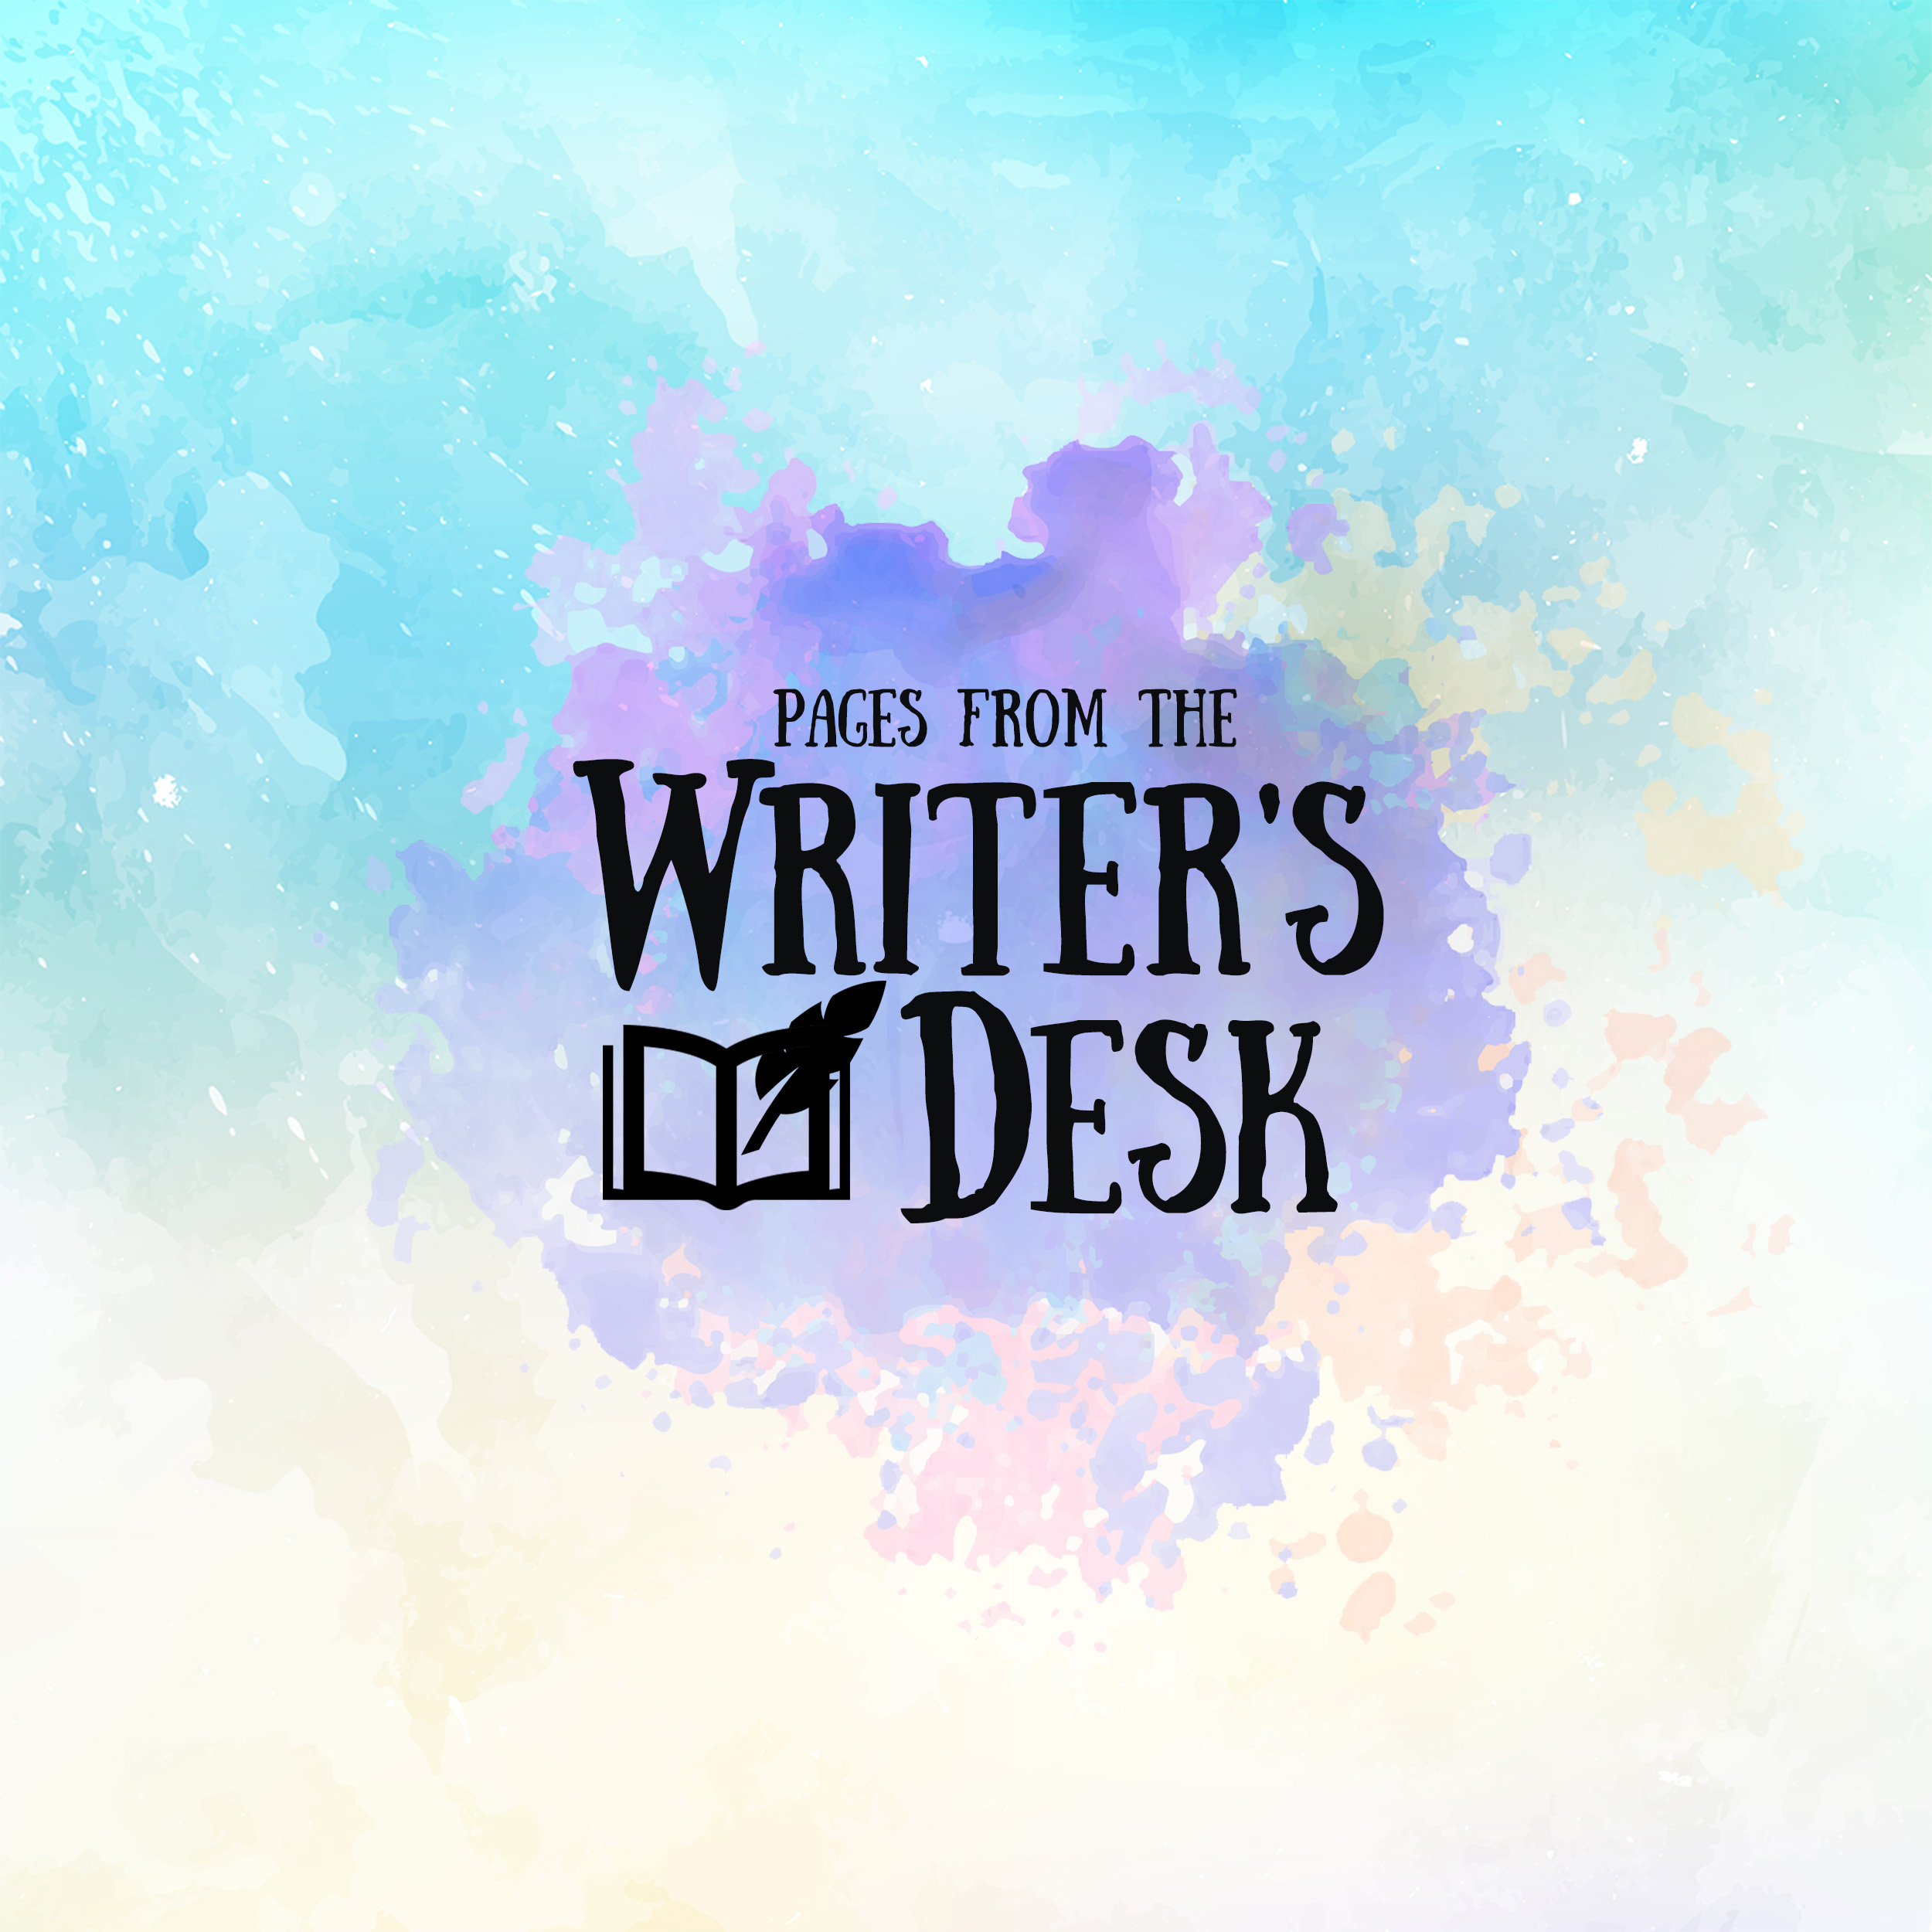 Pages from the Writer's Desk